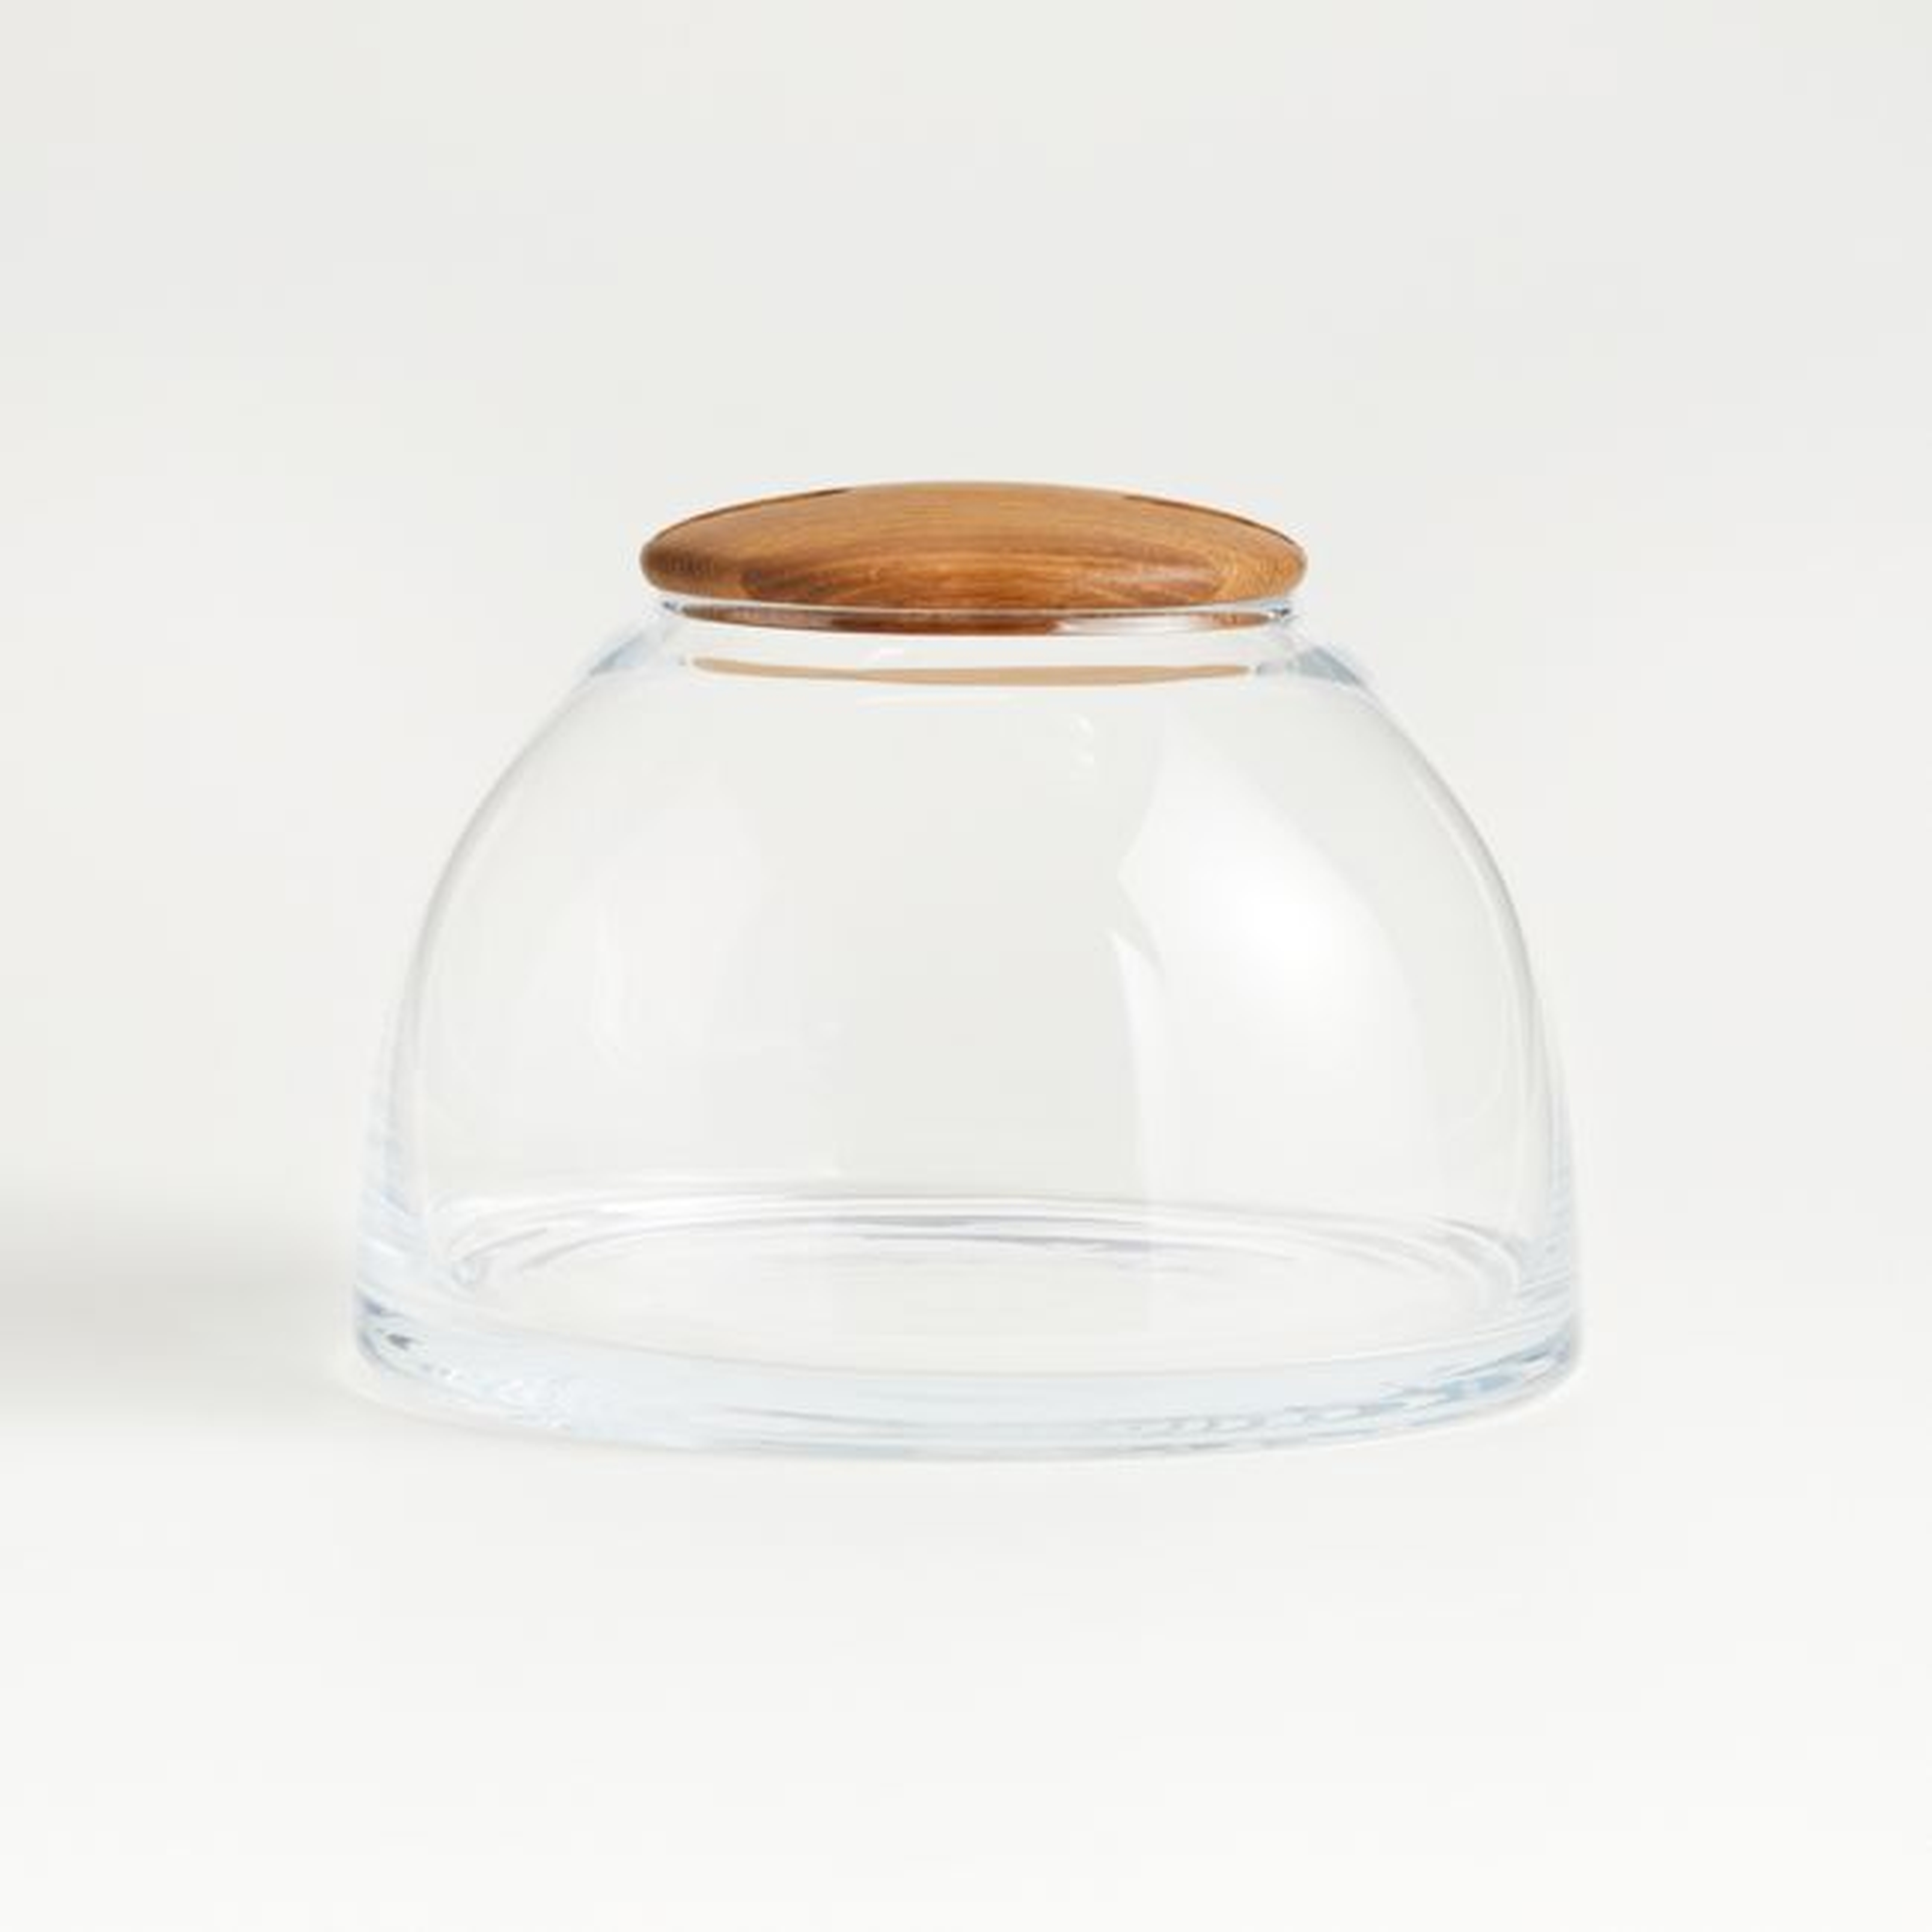 Small Glass Terrarium with Wood Lid - Crate and Barrel